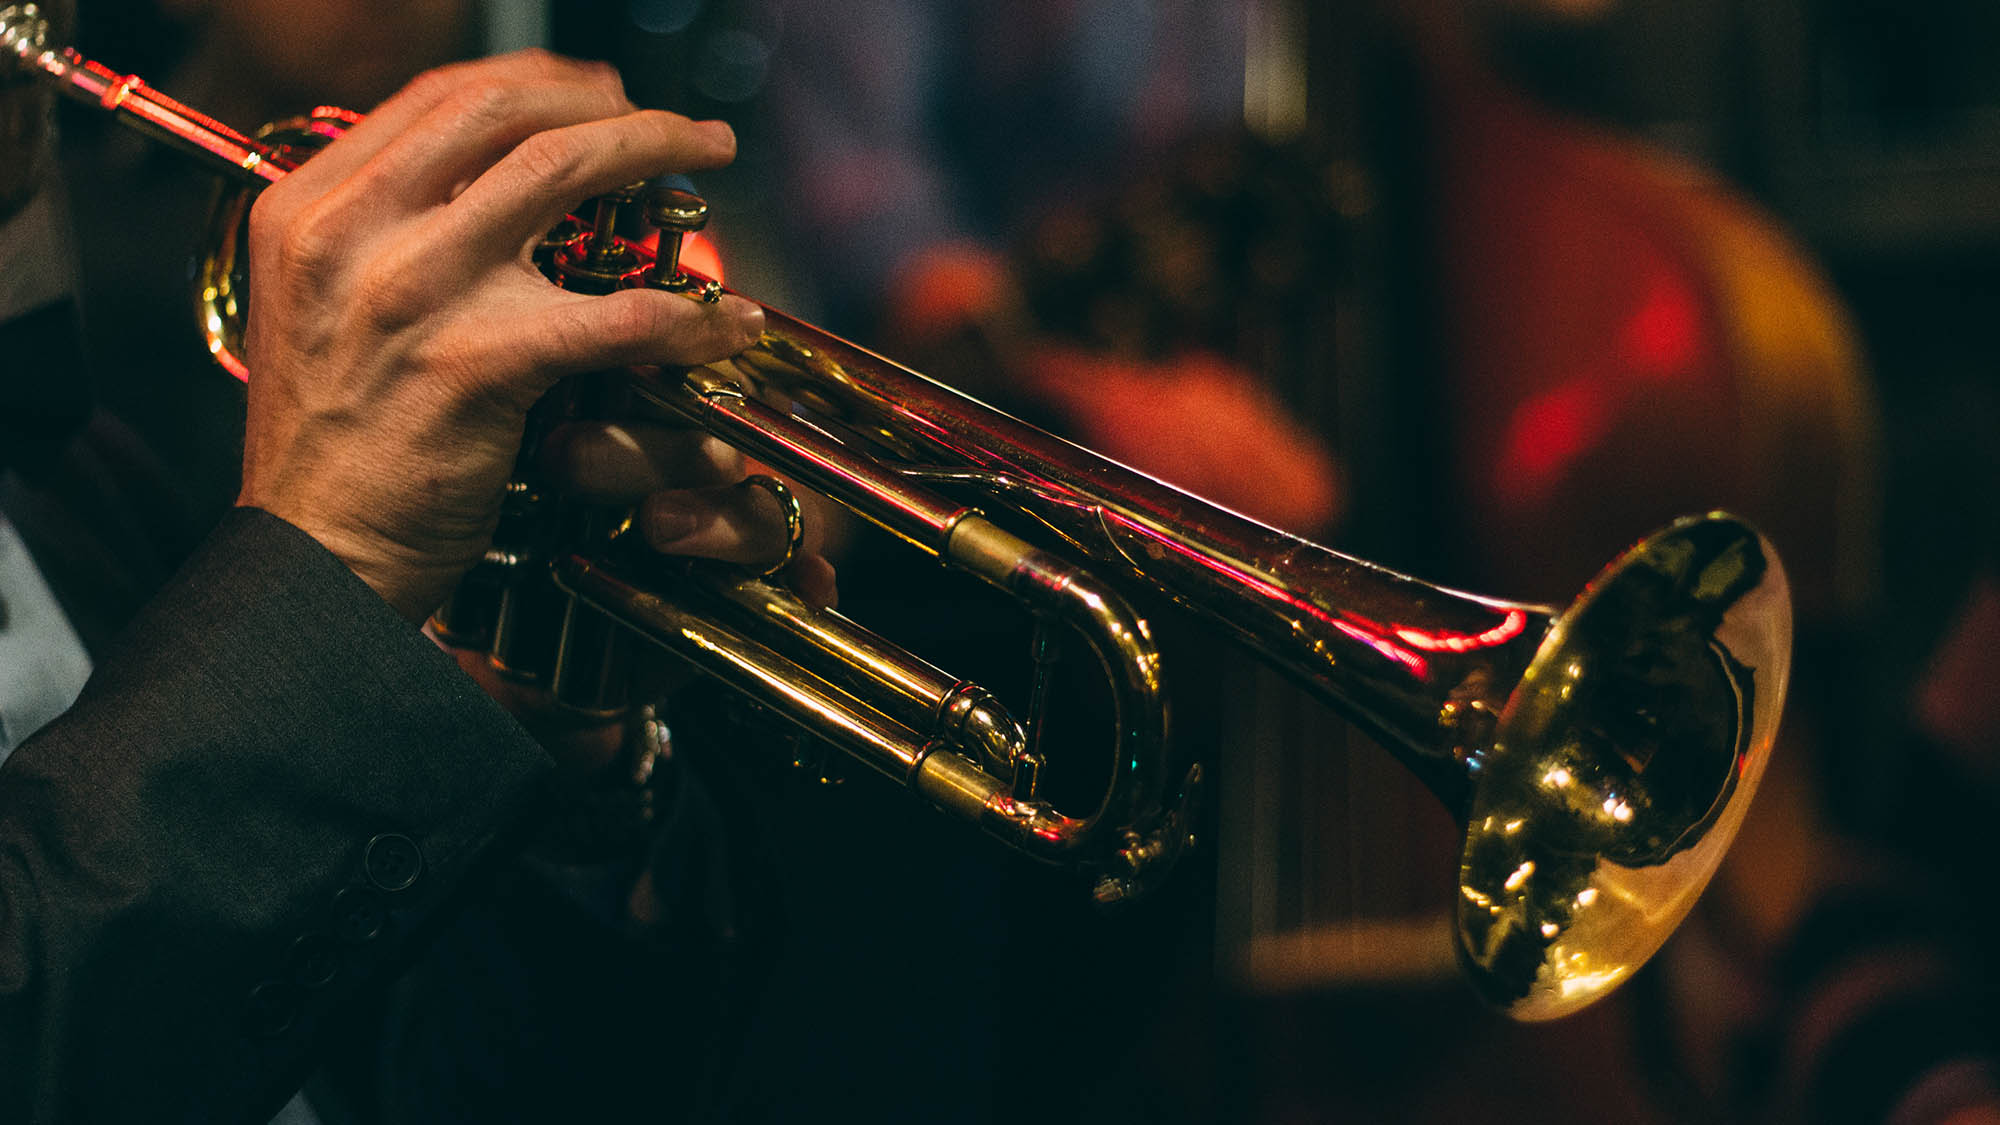 A photo of a trumpet with hands operating it